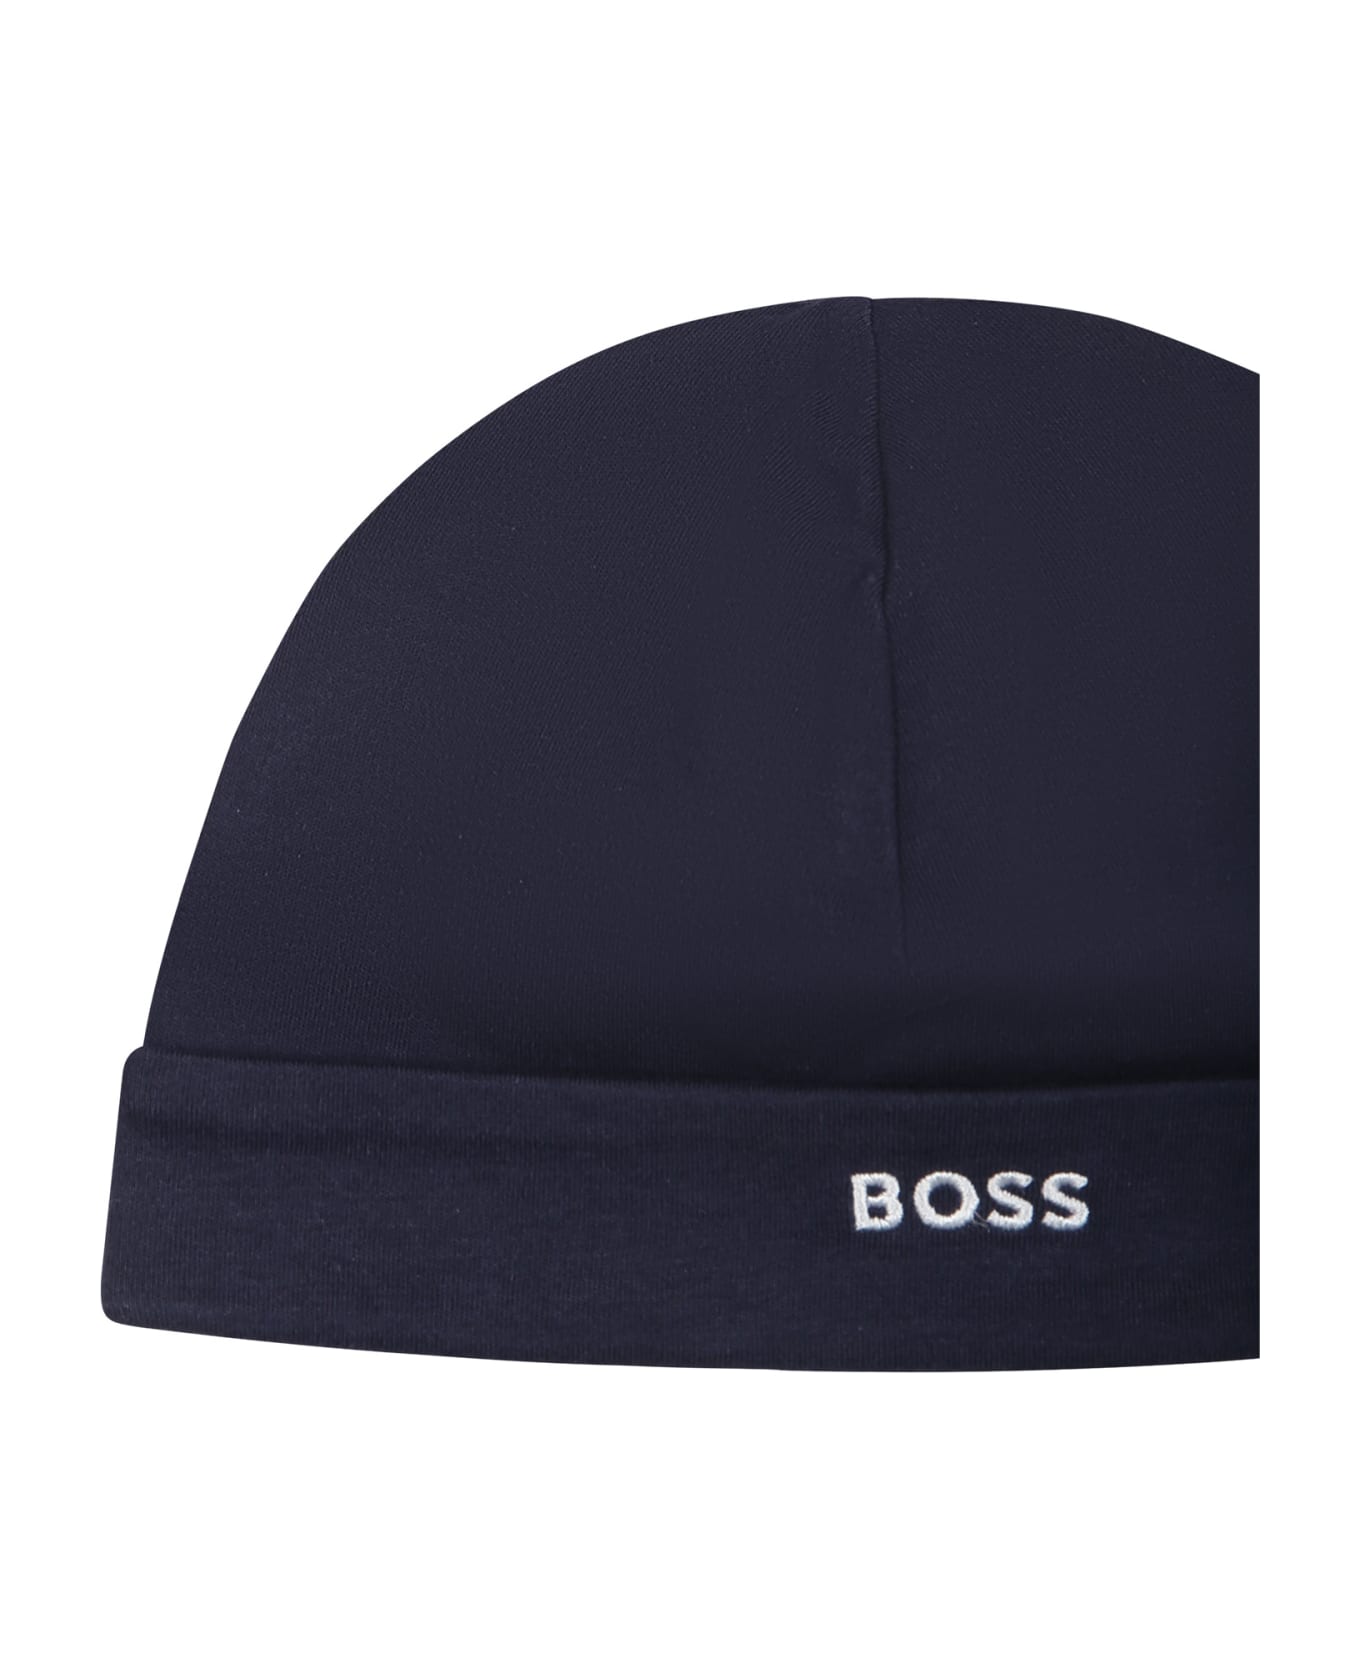 Hugo Boss Blue Hat For Baby Boy With Logo - Blue アクセサリー＆ギフト